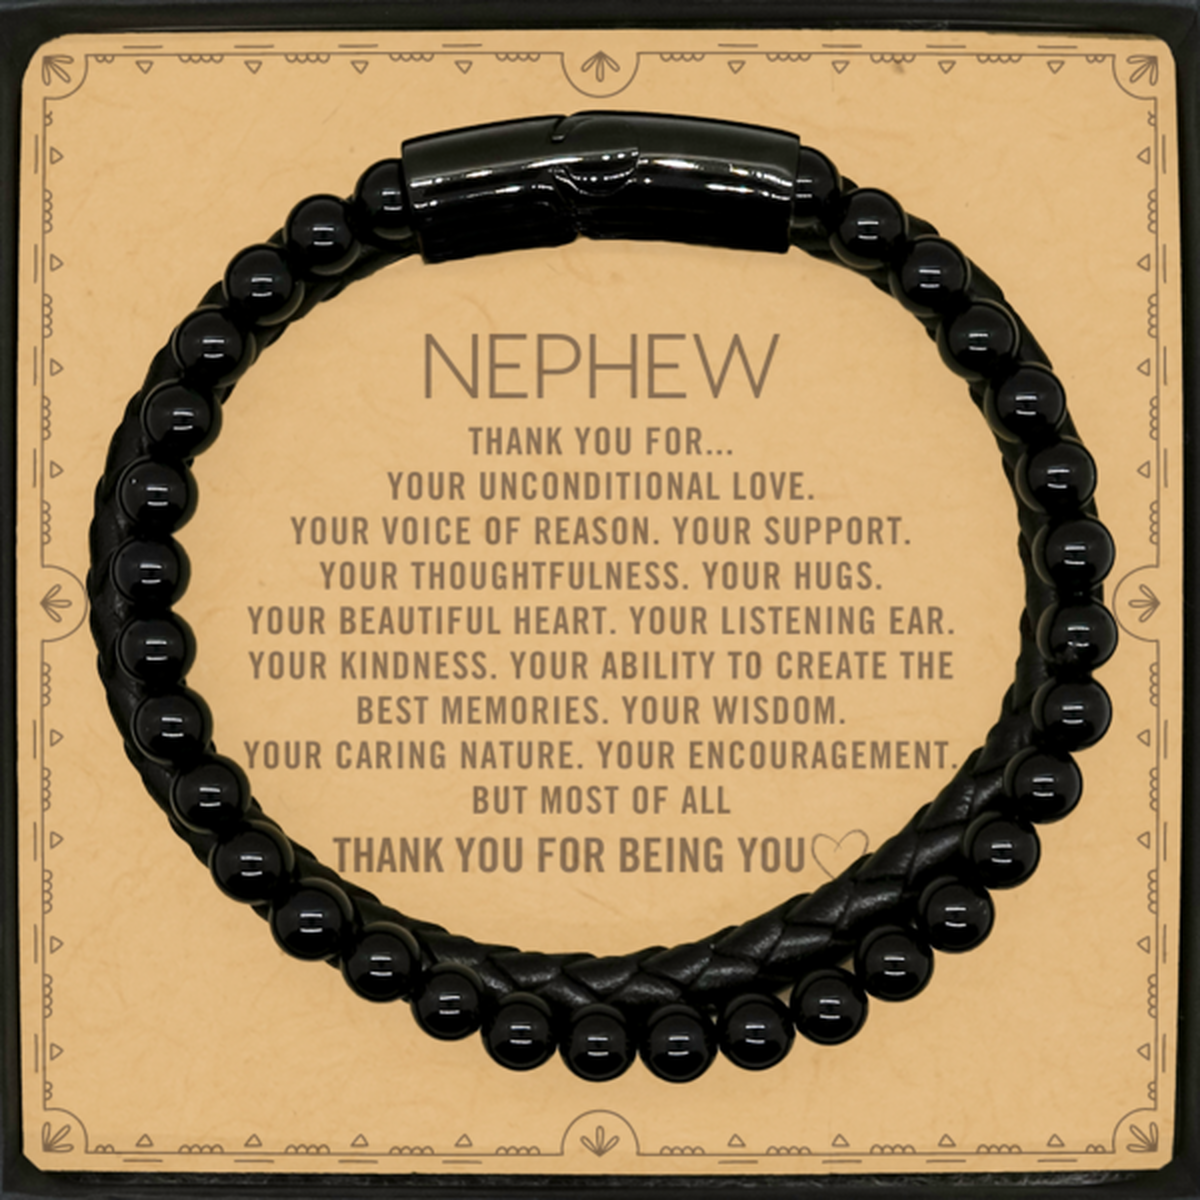 Nephew Stone Leather Bracelets Custom, Message Card Gifts For Nephew Christmas Graduation Birthday Gifts for Men Women Nephew Thank you for Your unconditional love